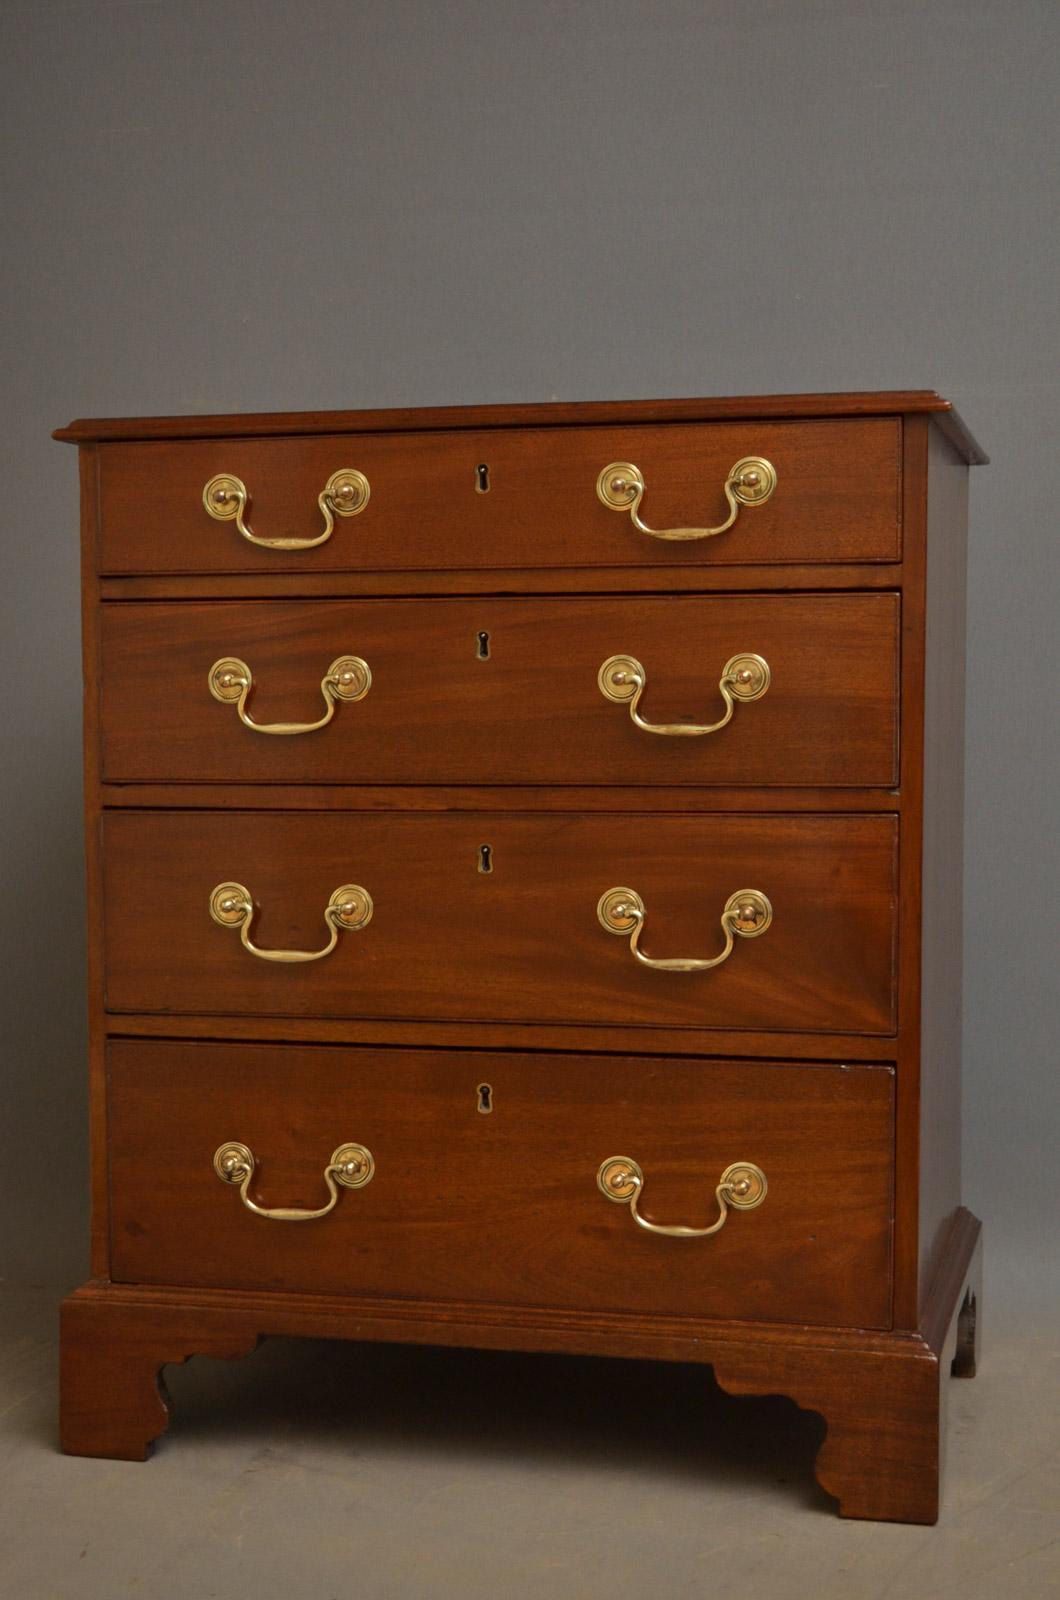 Victorian Georgian Revival Mahogany Chest of Drawers of Small Proportions